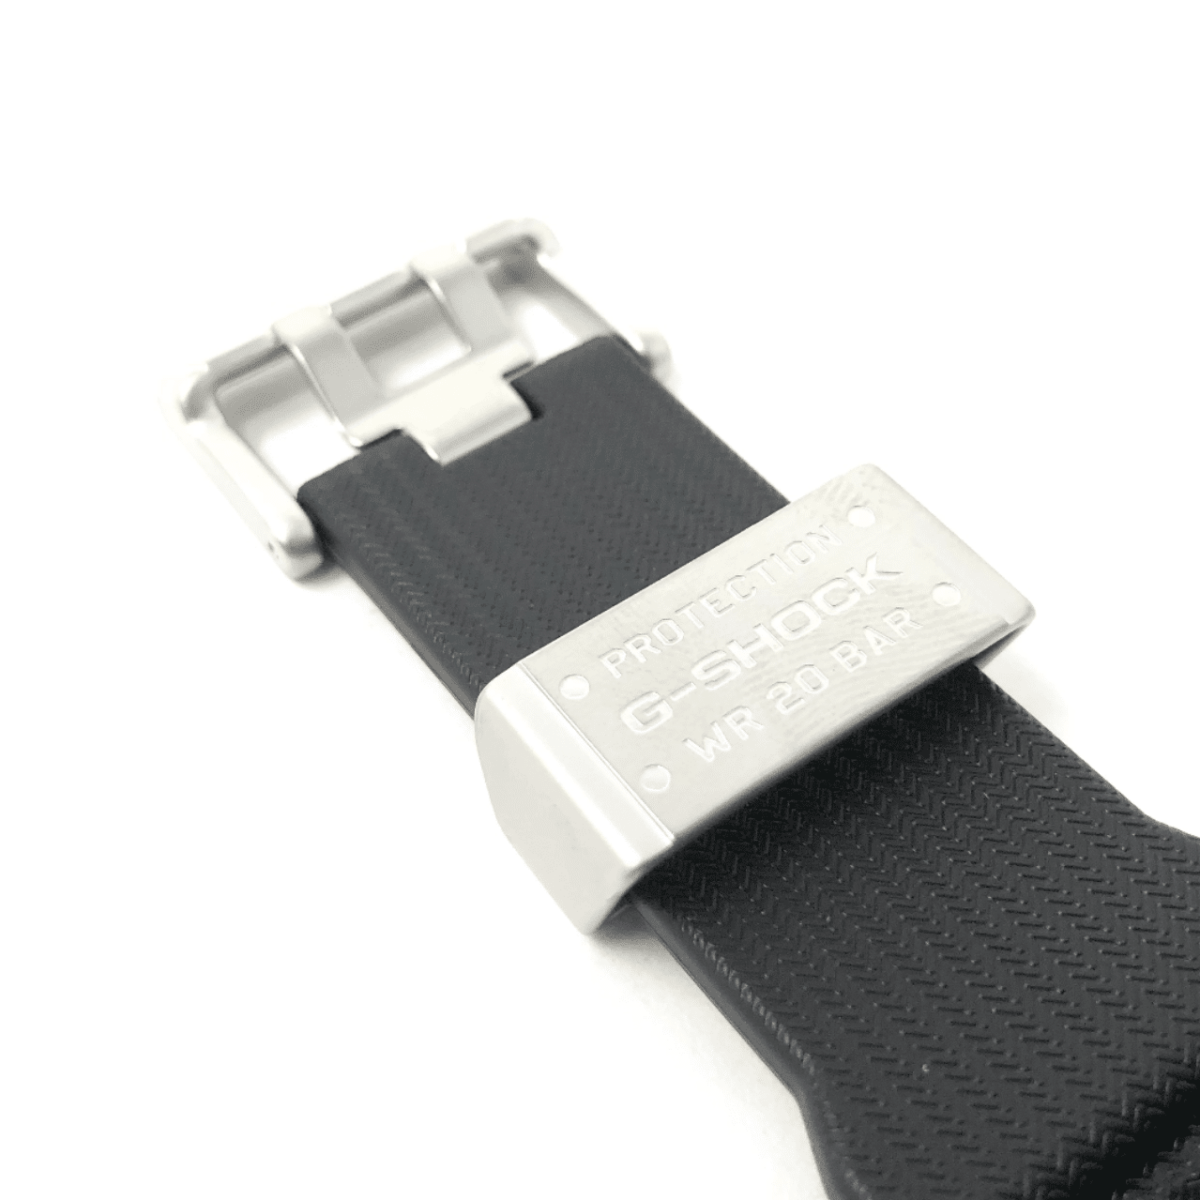 Casio Watch Strap G Shock Genuine Black Replacement 10632705 fits GWG 1000 1A 194509276730 5 - Maddisons UK